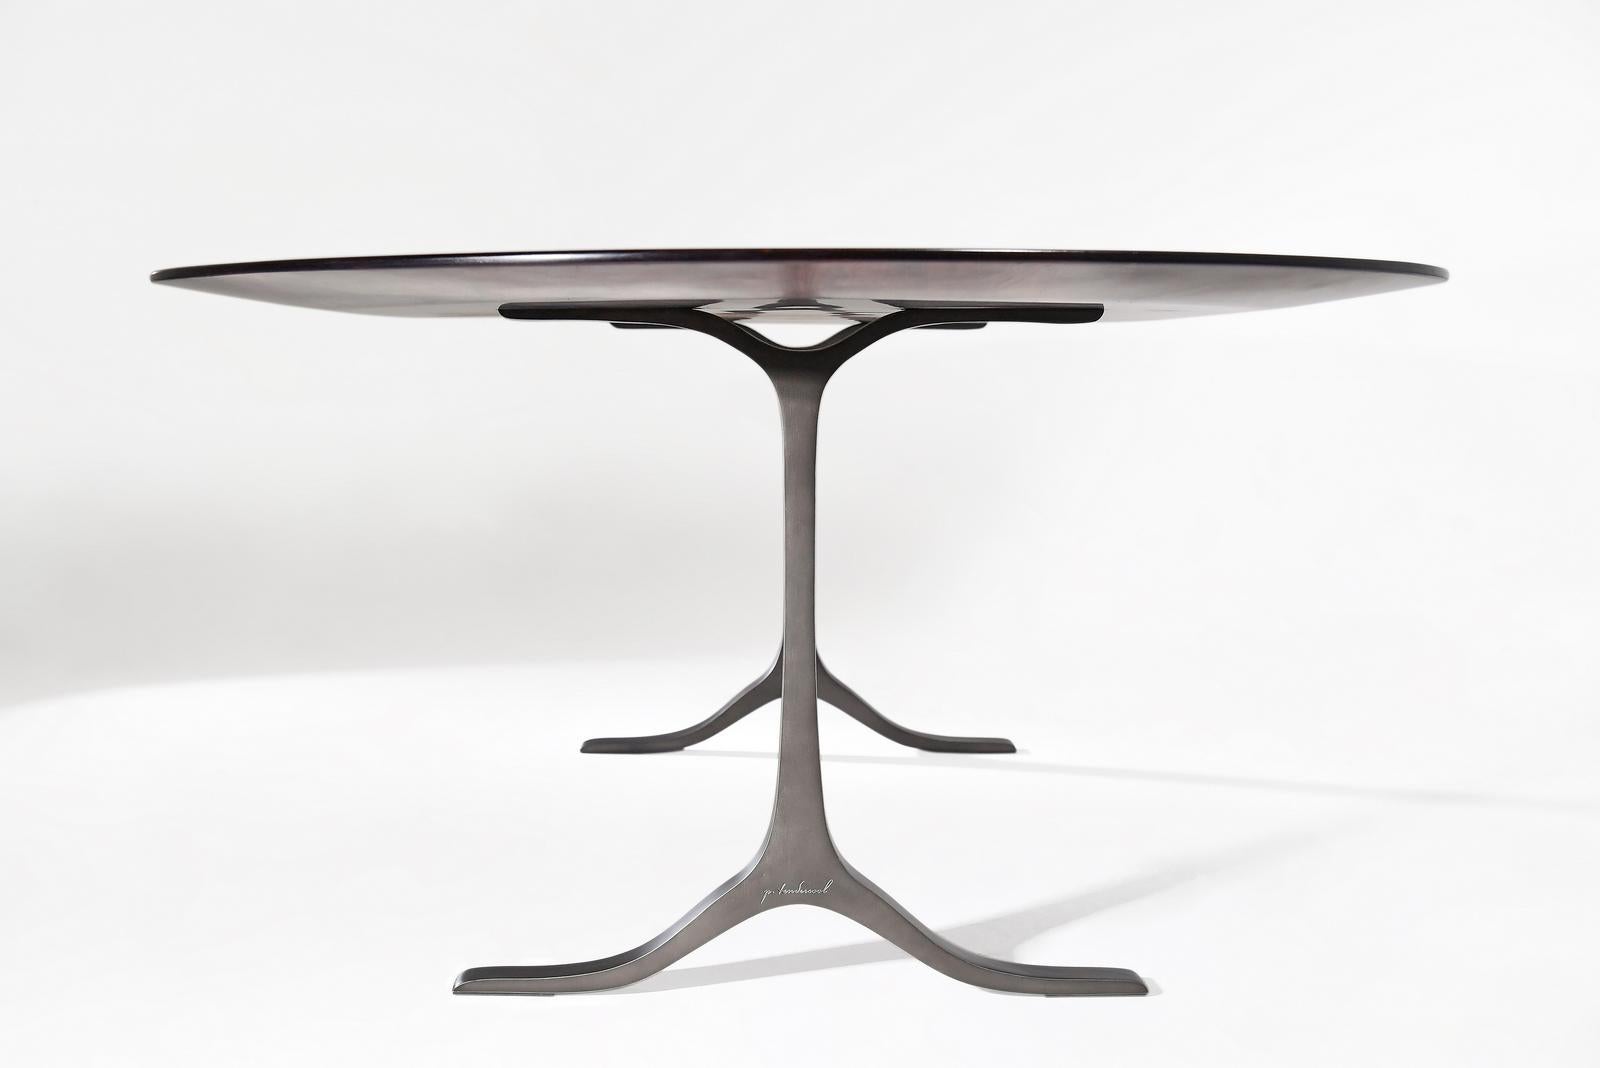 Cast Bespoke Dining Table Beveled Edge Reclaimed Wood, Aluminum Base by P. Tendercool For Sale